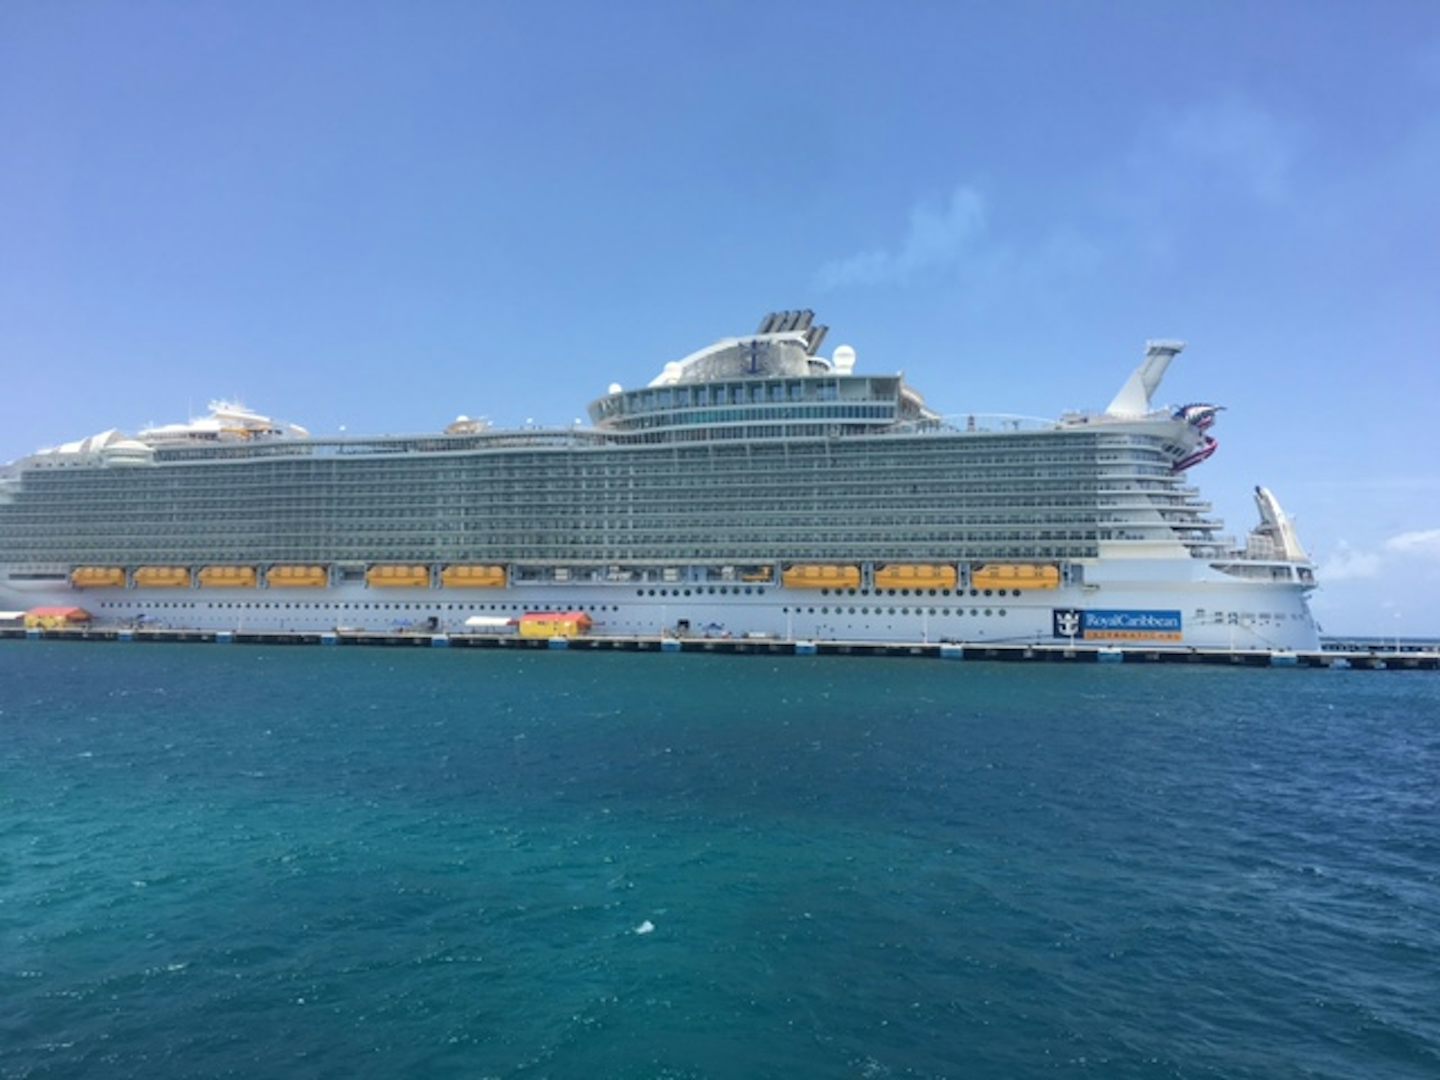 Harmony of the Seas view from excursion boat in Labadee, Haiti